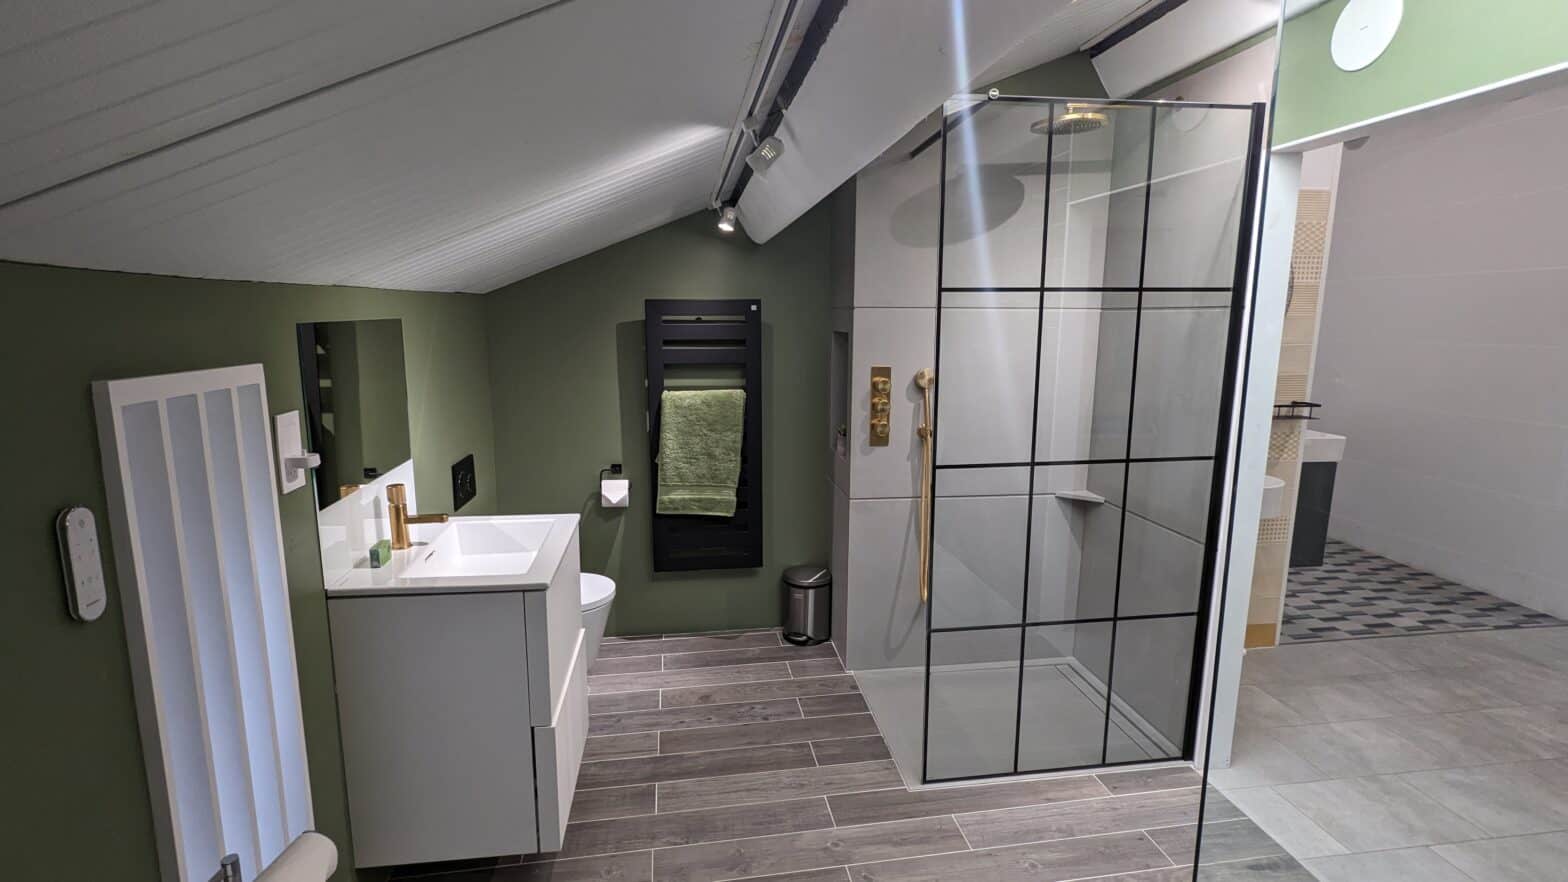 A Green painted bathroom with a walk in shower with grid shower screen and brass tapware.